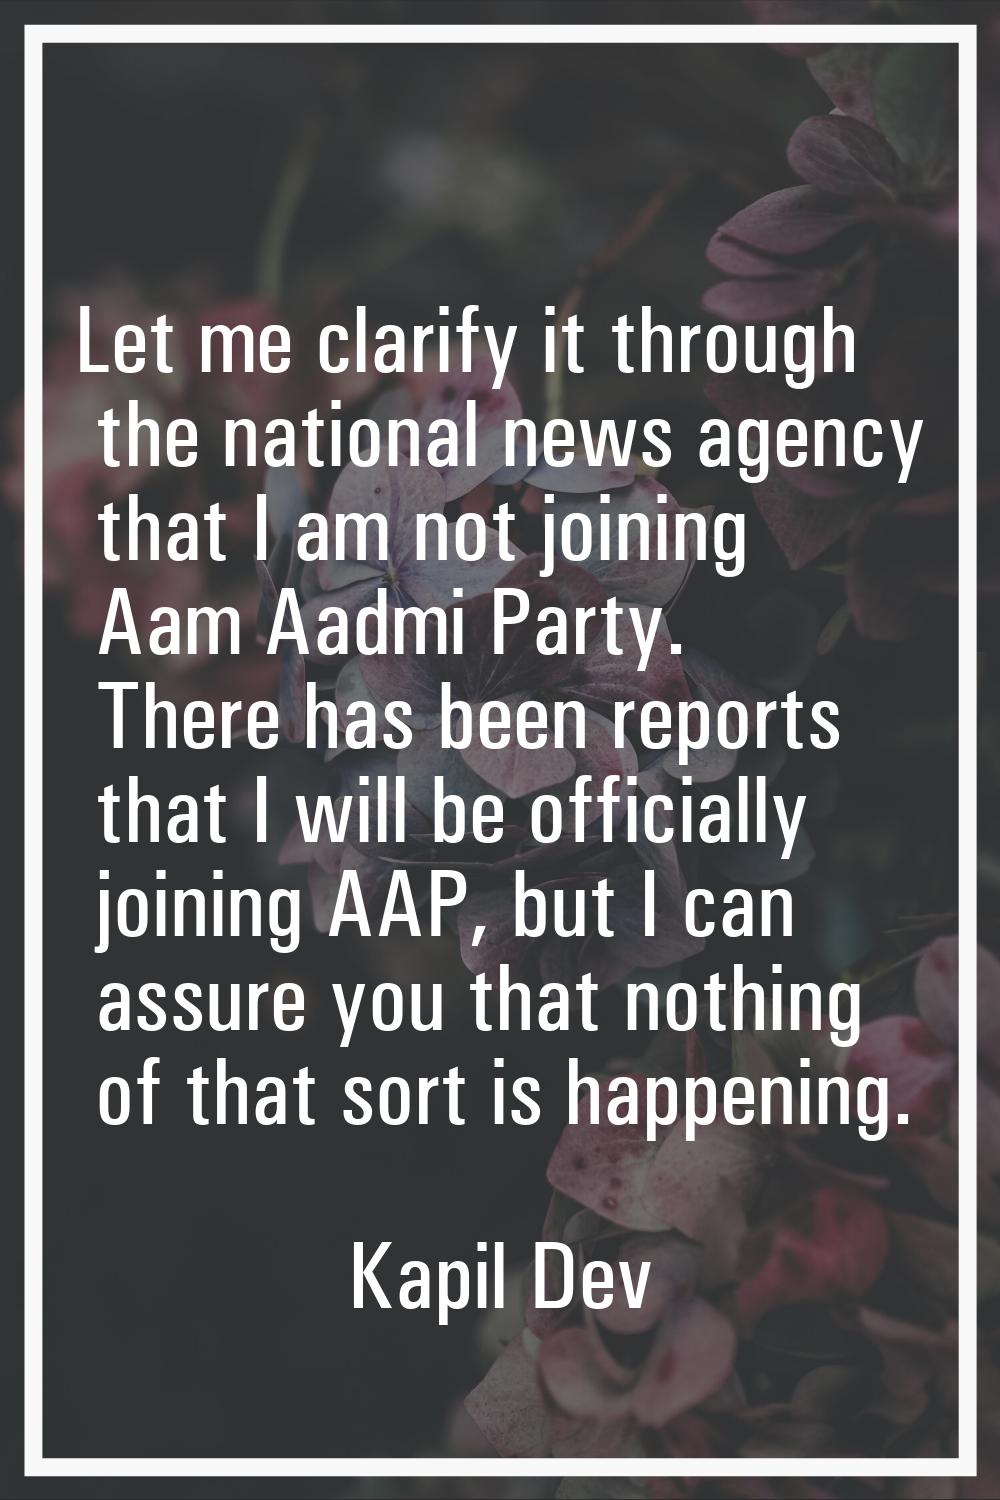 Let me clarify it through the national news agency that I am not joining Aam Aadmi Party. There has